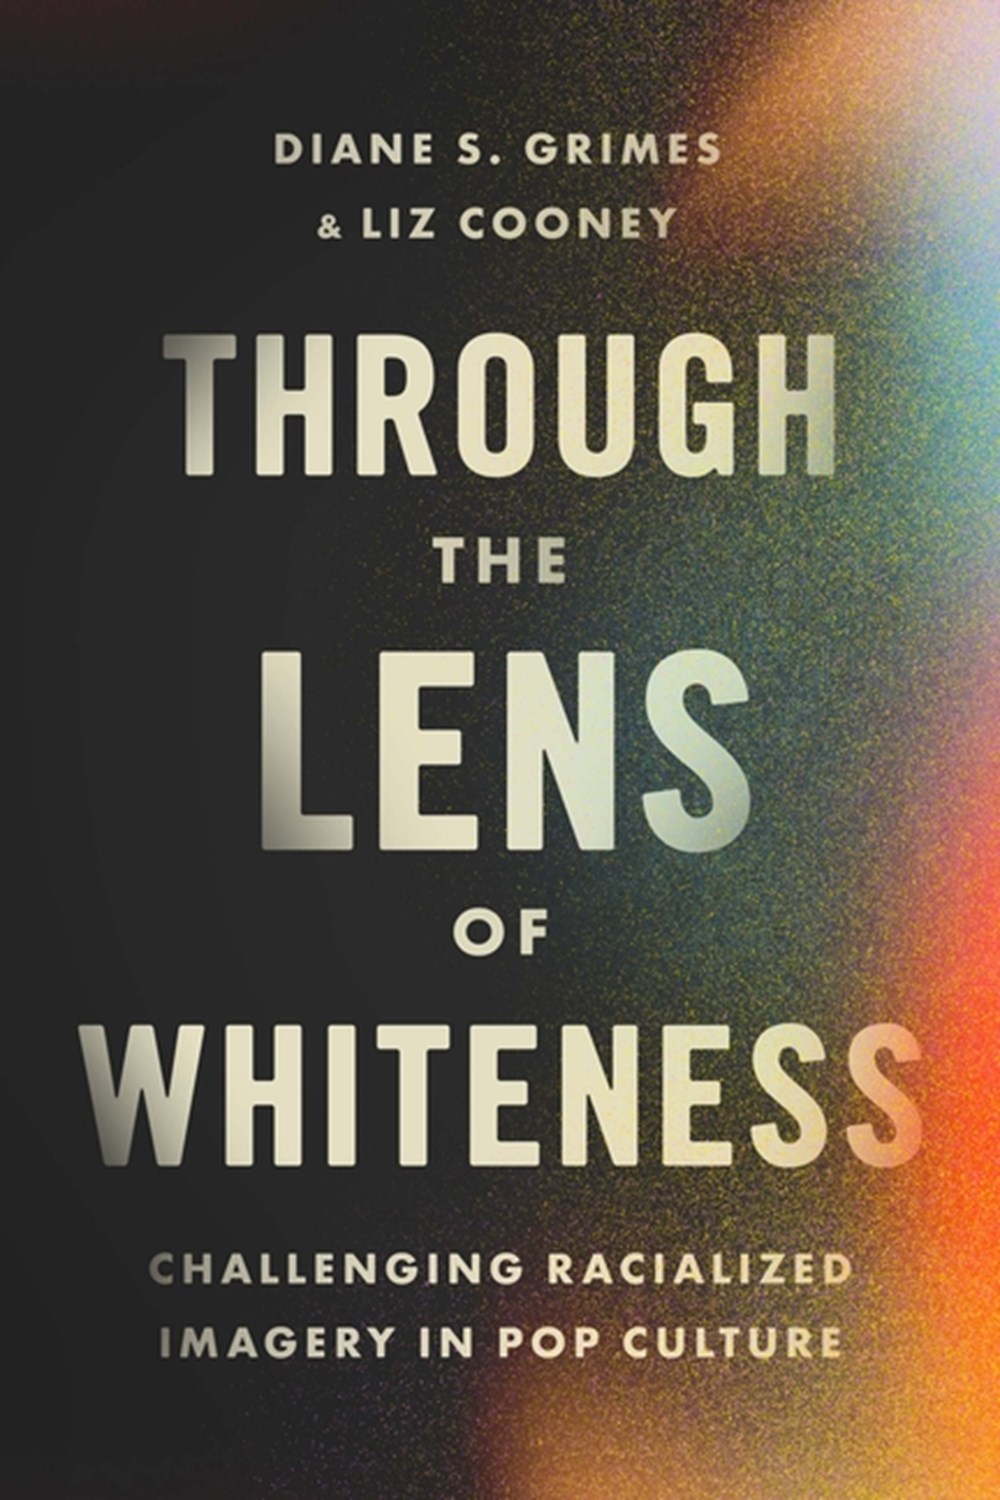 Through the Lens of Whiteness: Challenging Racialized Imagery in Pop Culture